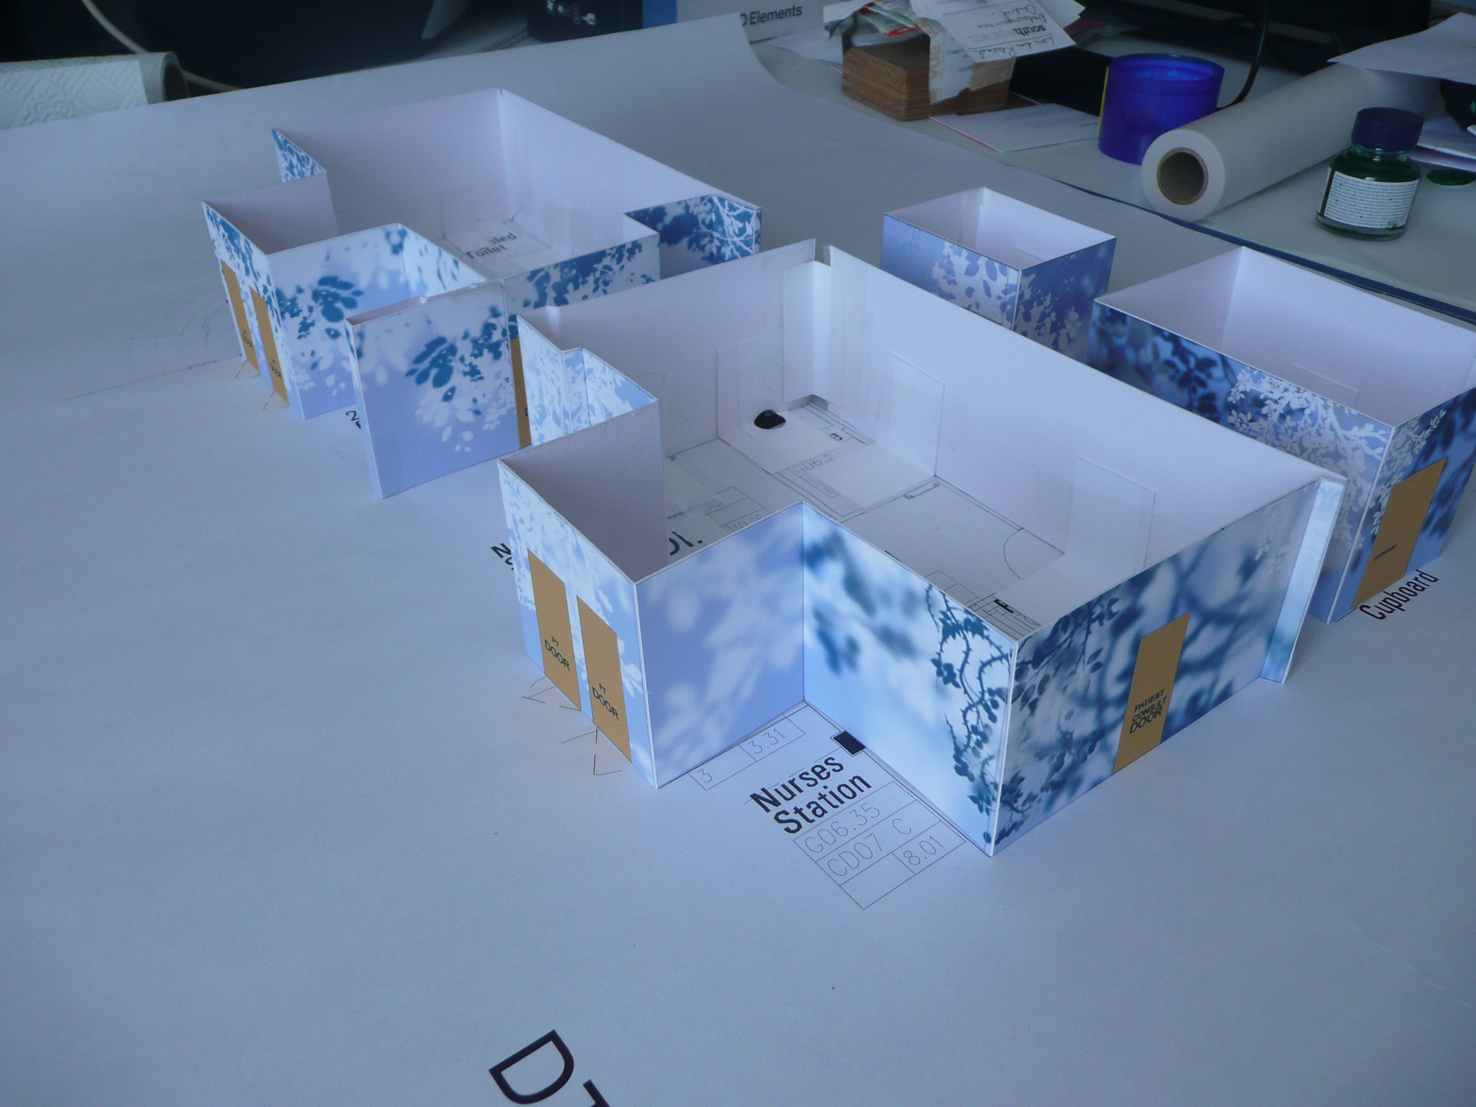 This is a scale model of the interior 'island' and a concept surface design to illustrate the approach.